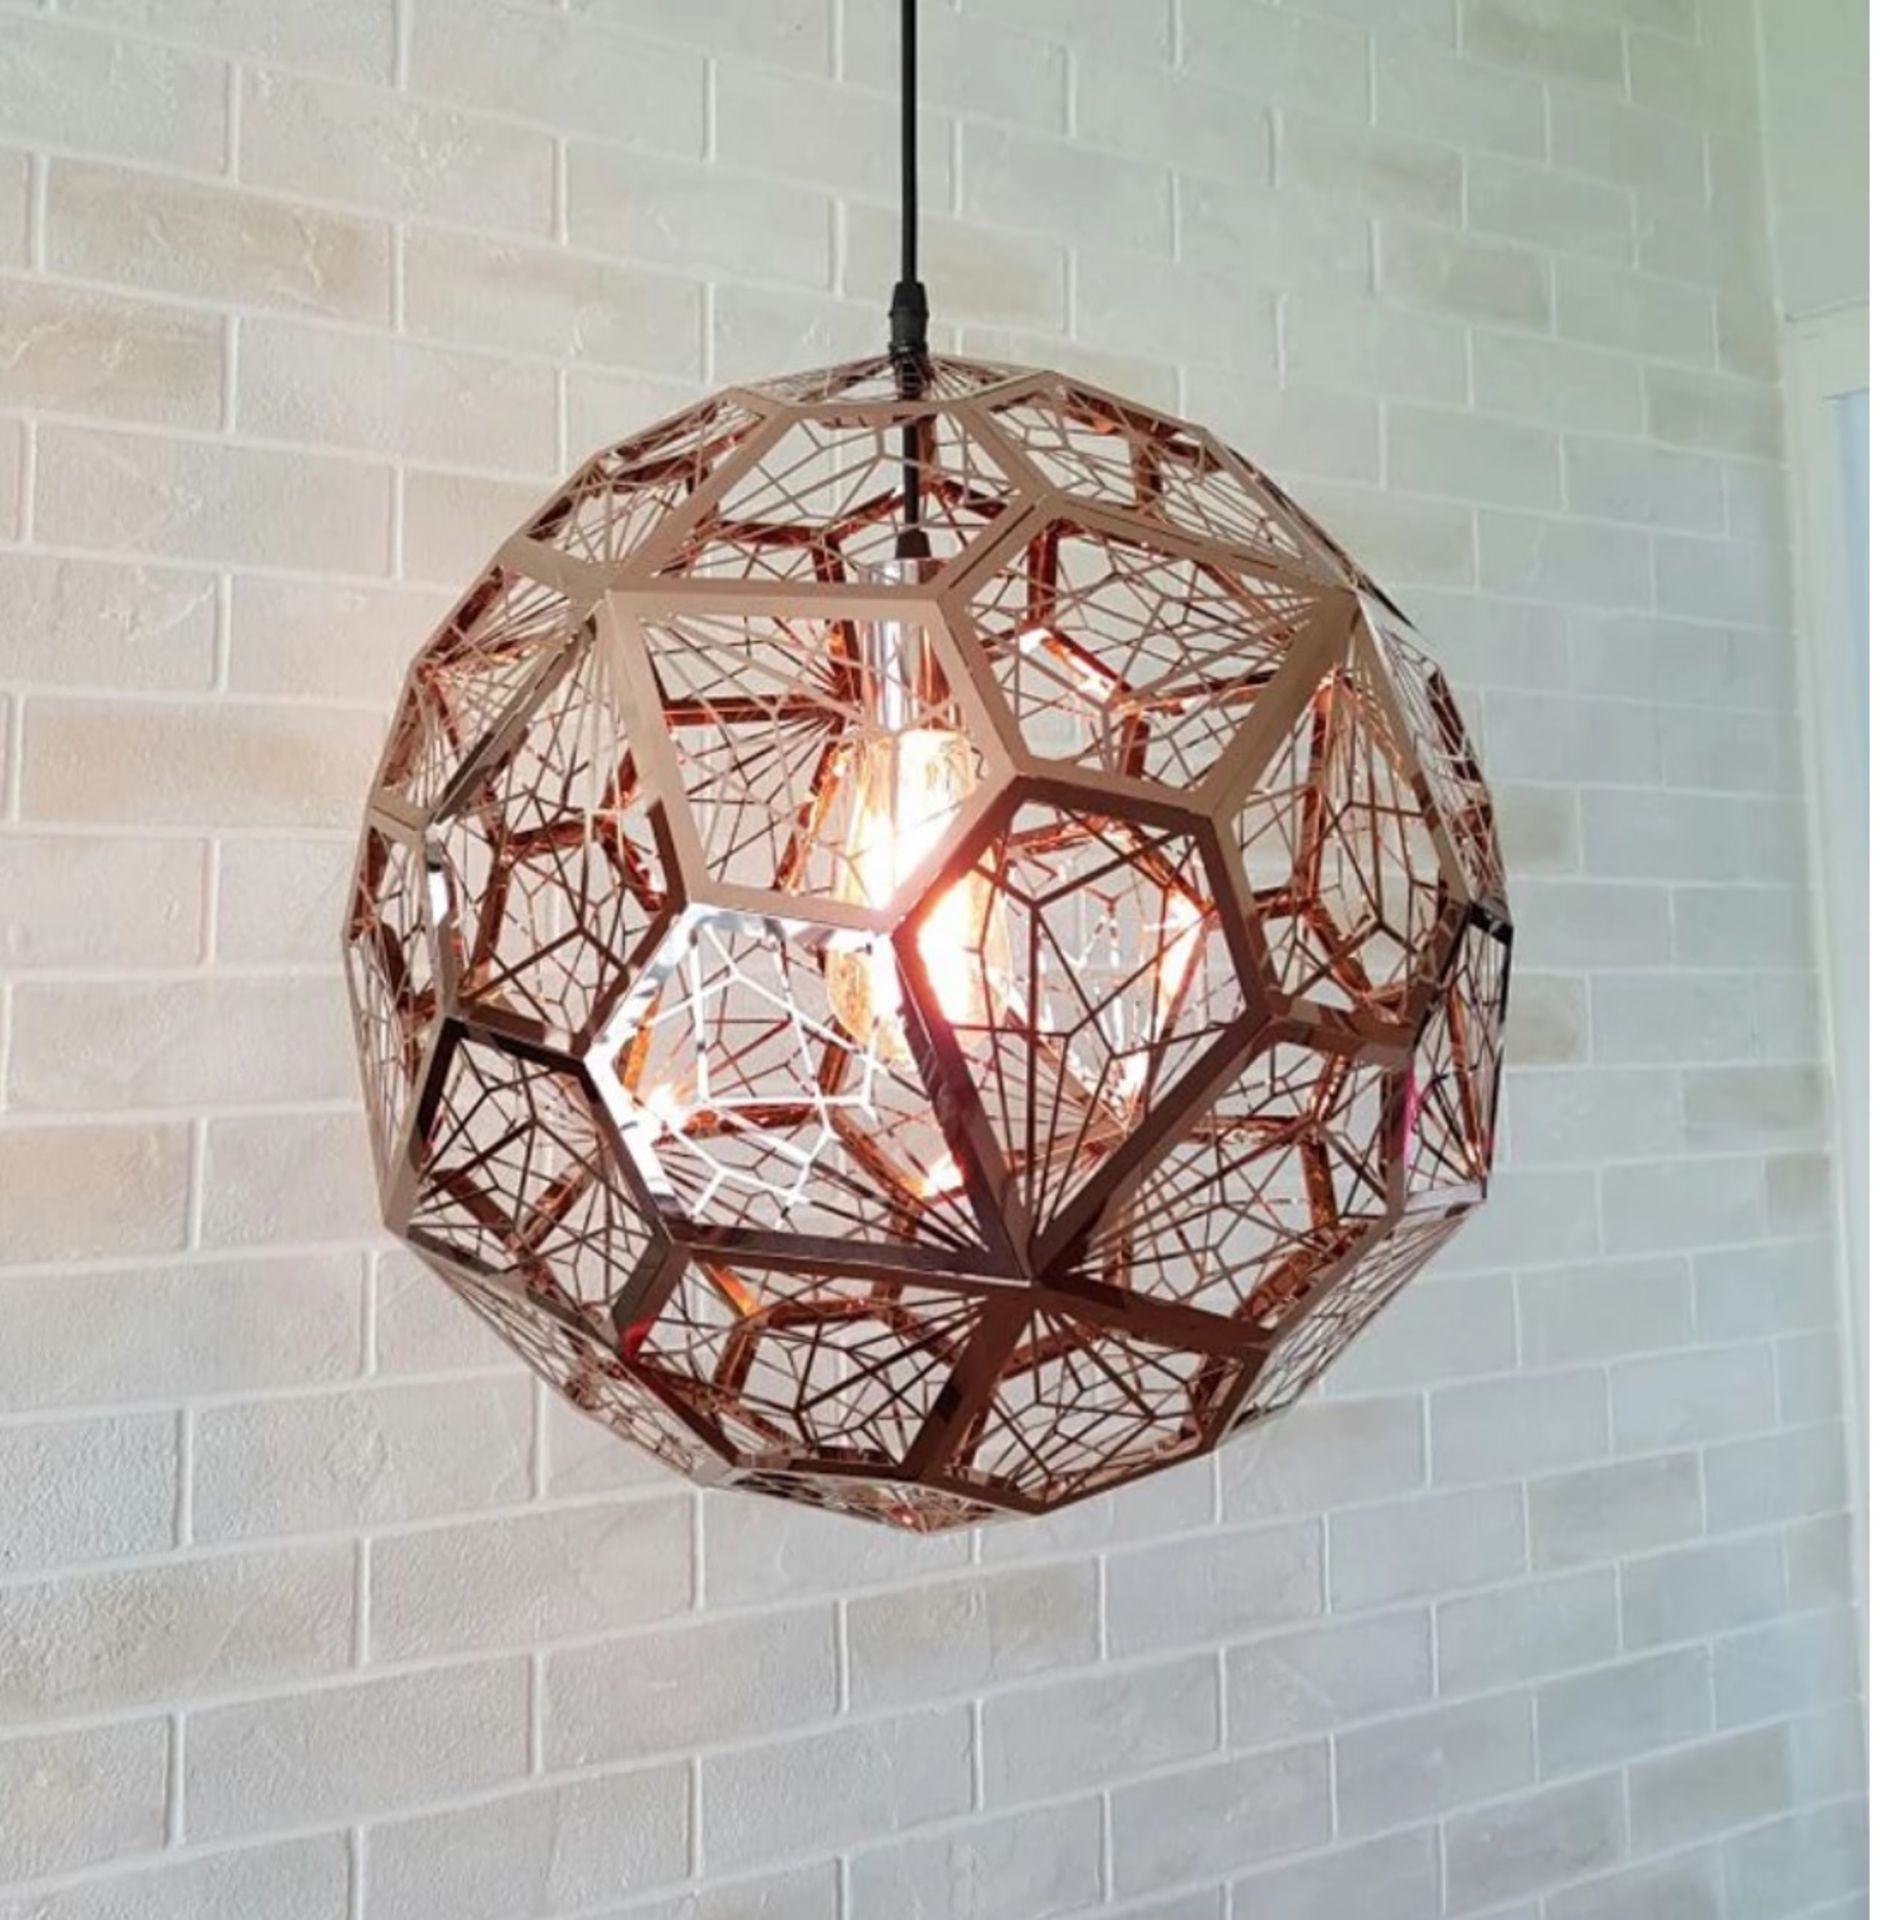 Rango 32cm Copper Pendant Light Inspired by the logic of mathematics, the shade is composed of